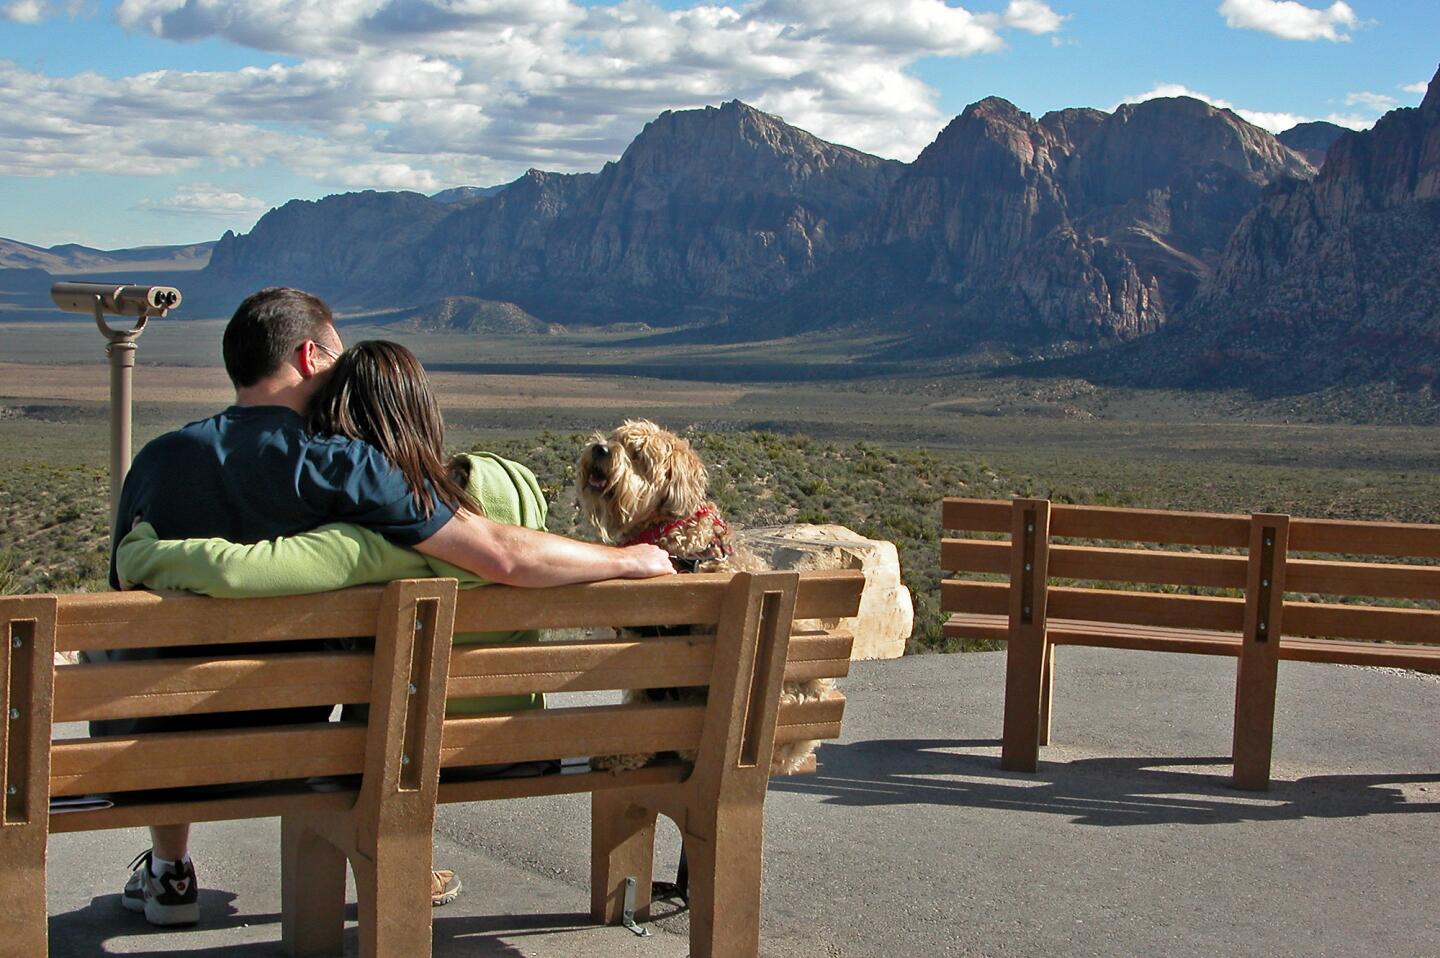 Darby makes some friends at the Red Rock Canyon National Conservation Area near Las Vegas.